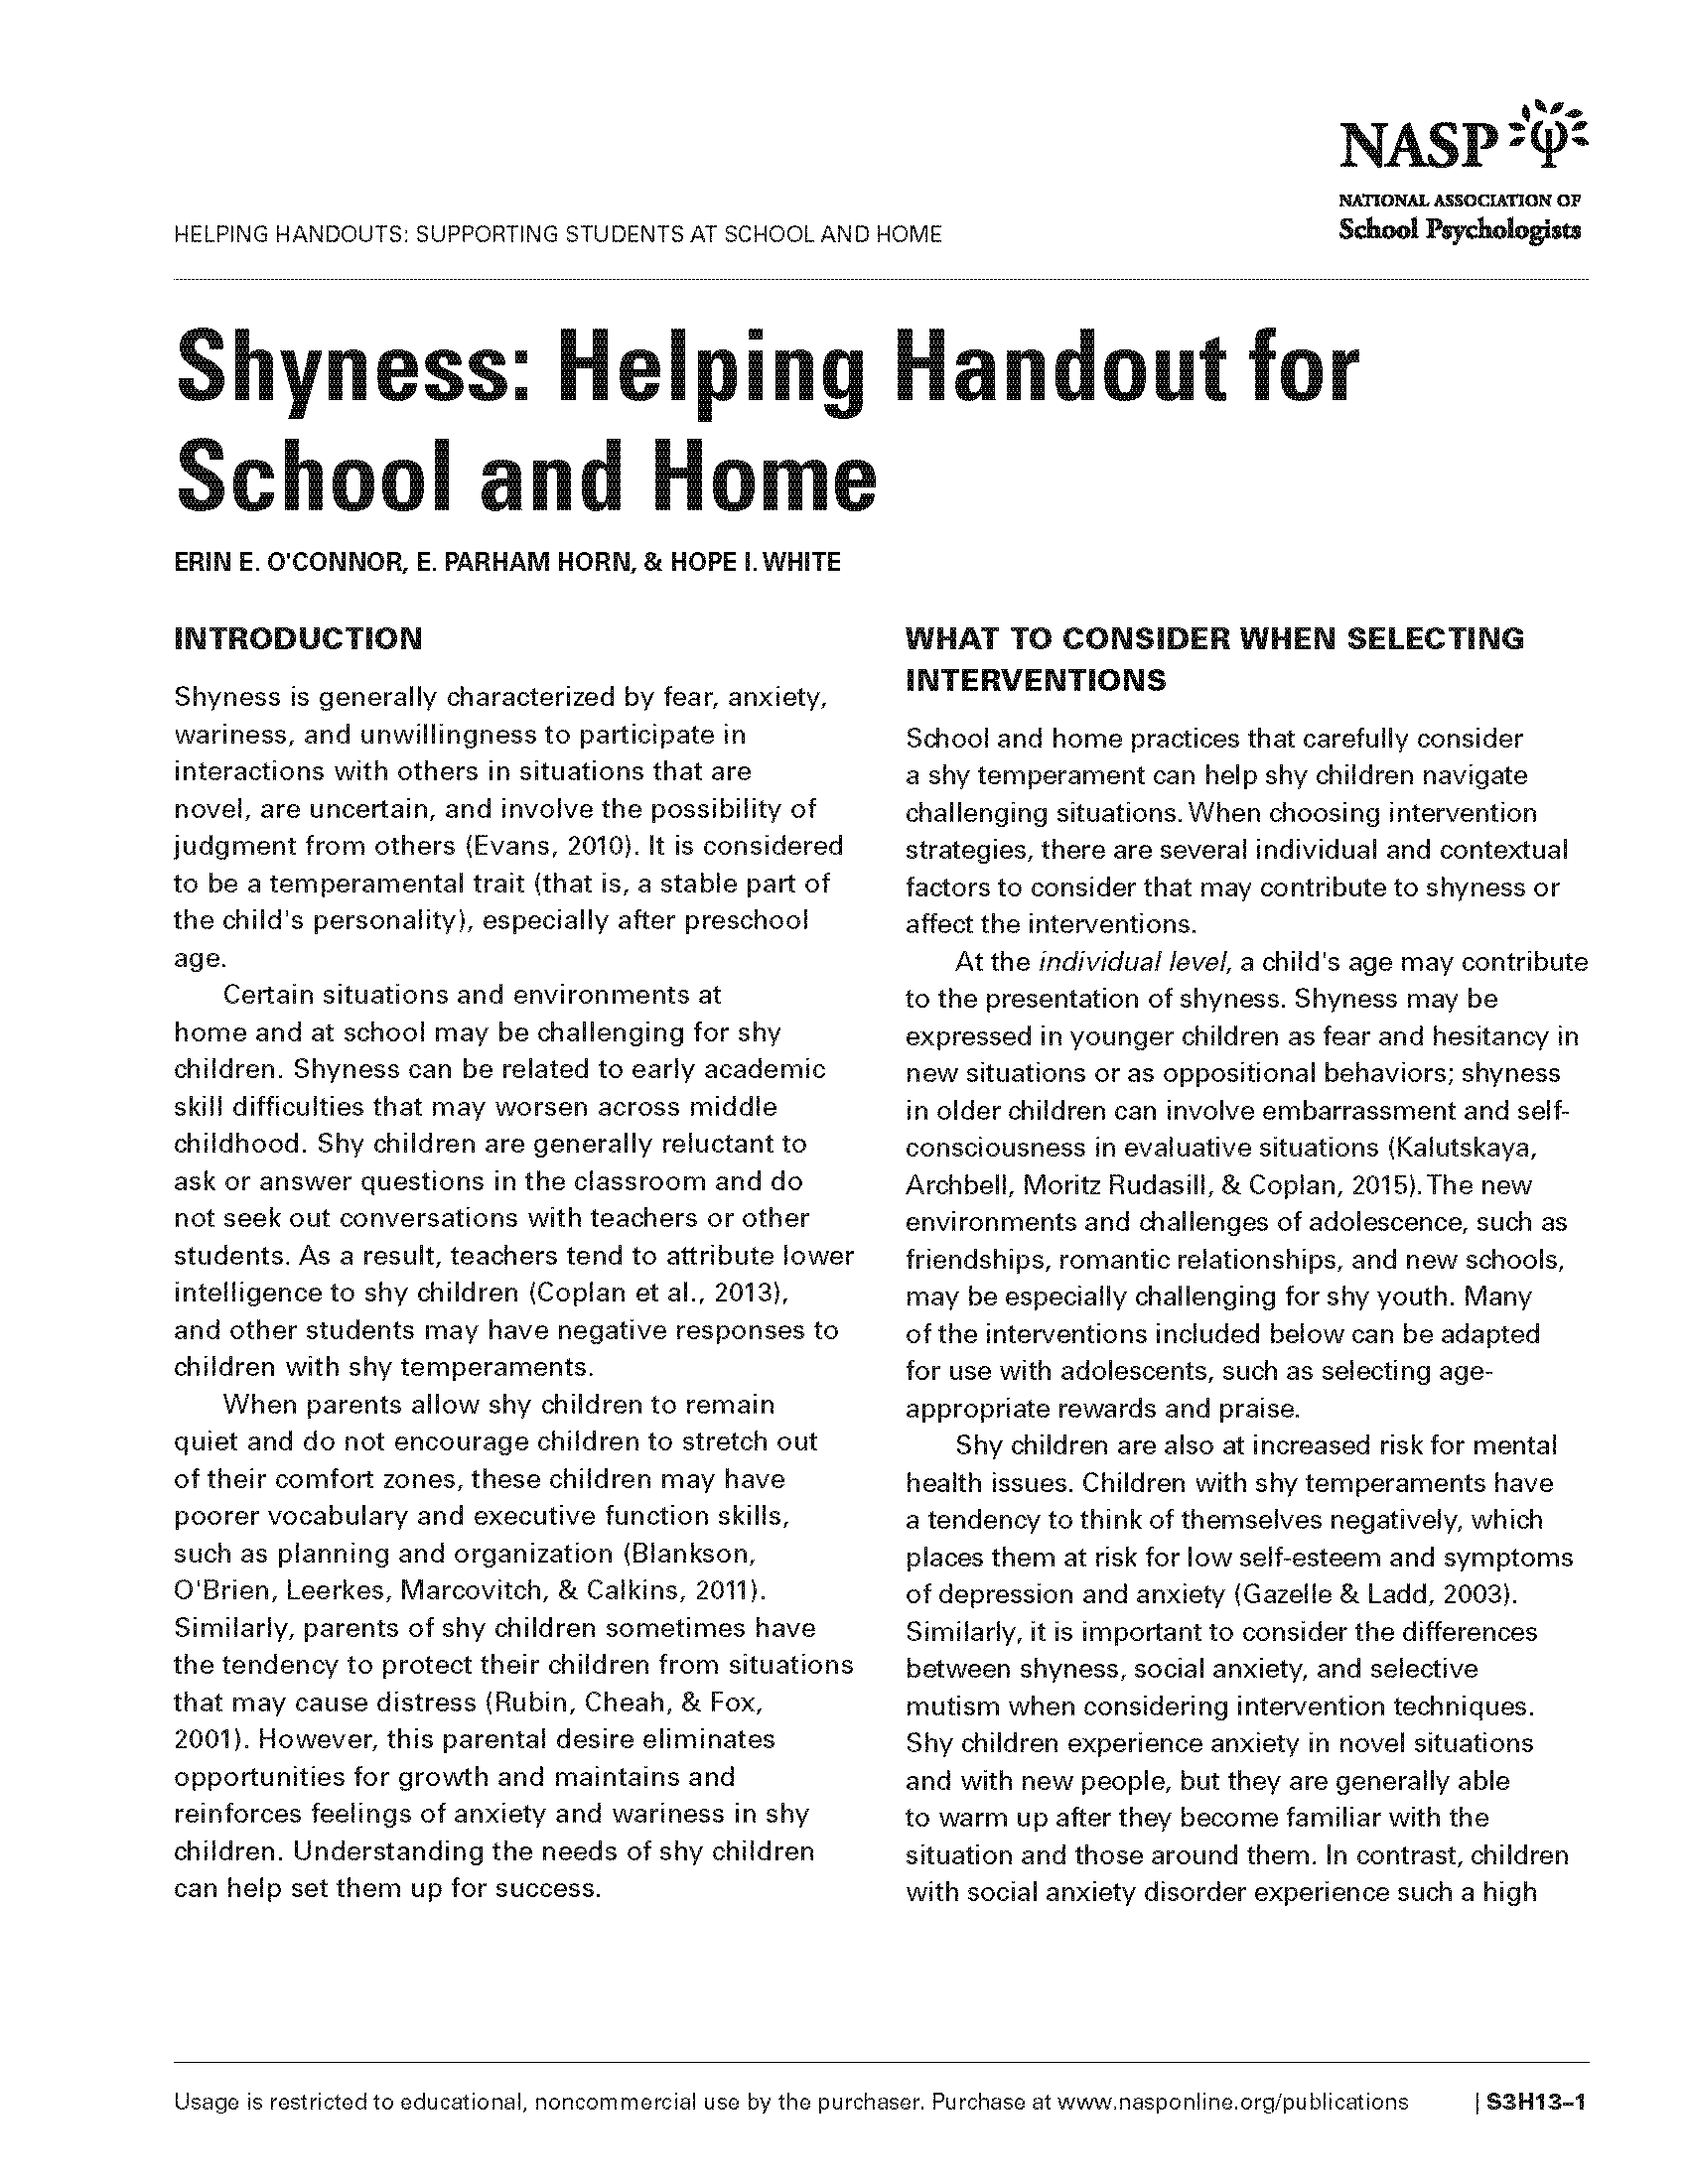 Shyness:  Helping Handout for School and Home